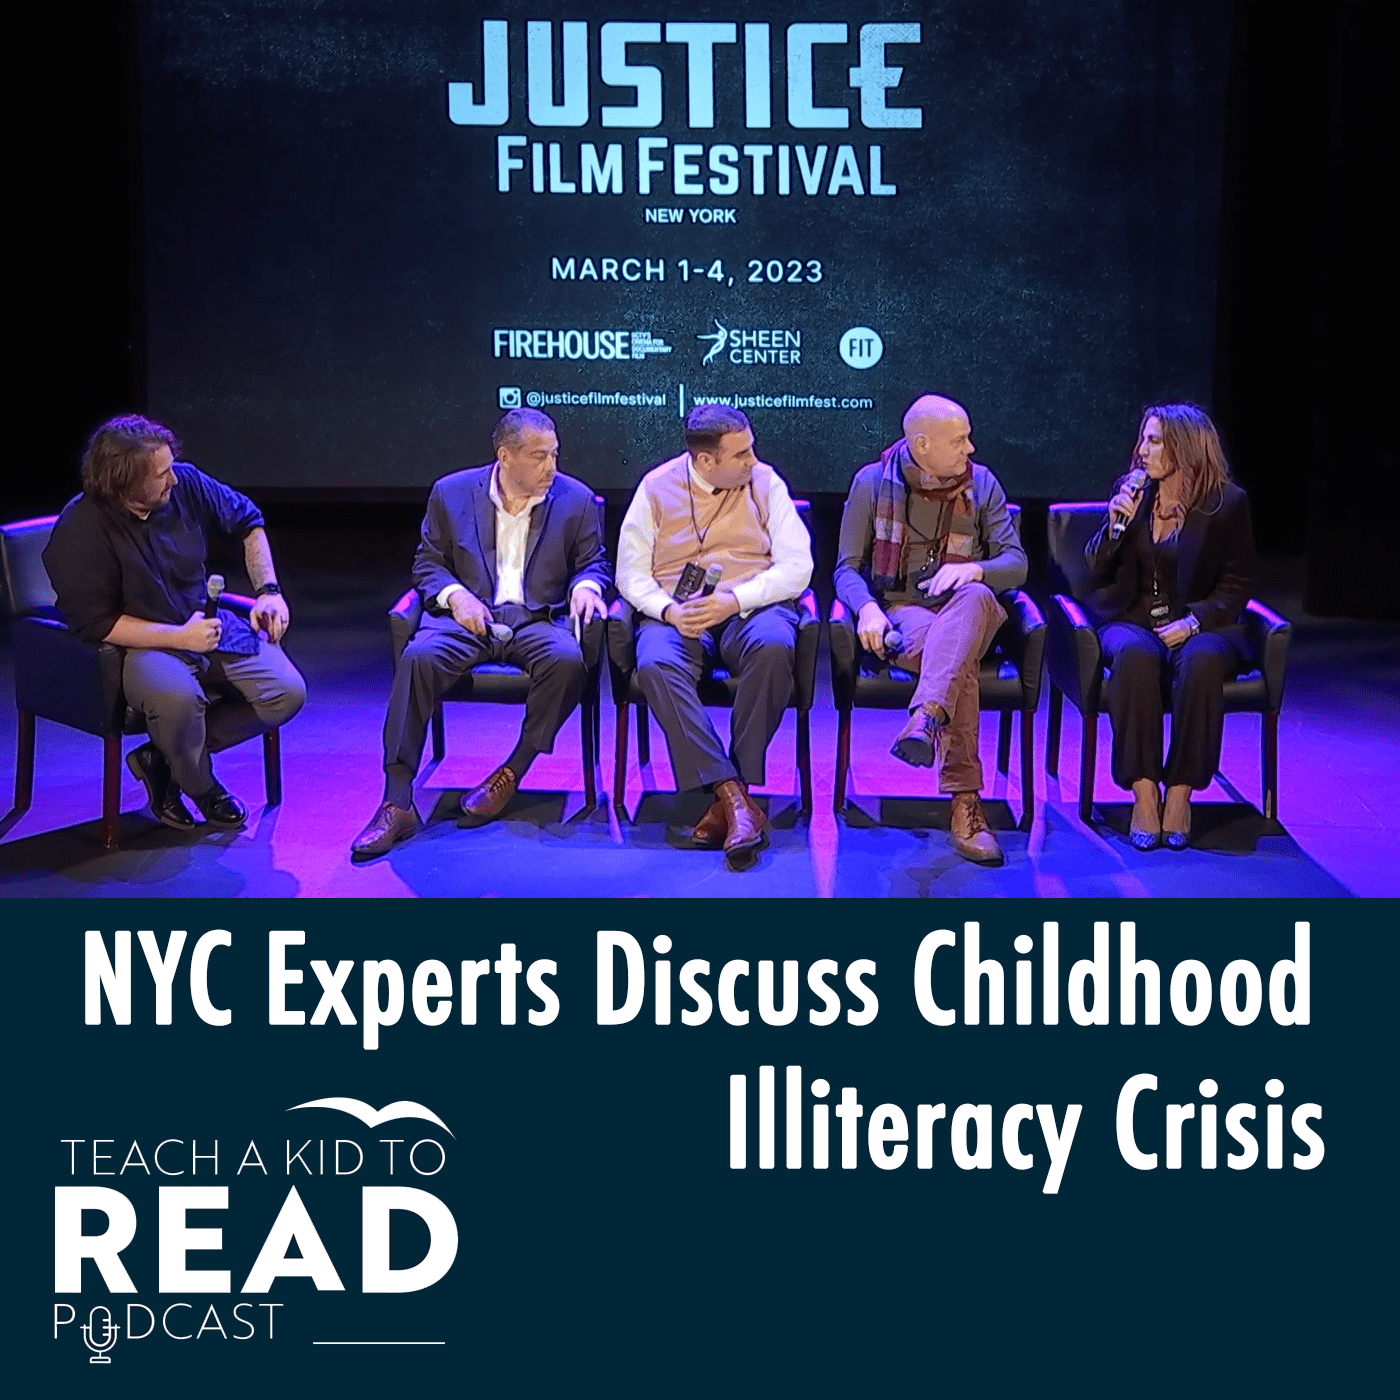 NYC Experts Discuss Childhood Illiteracy Crisis